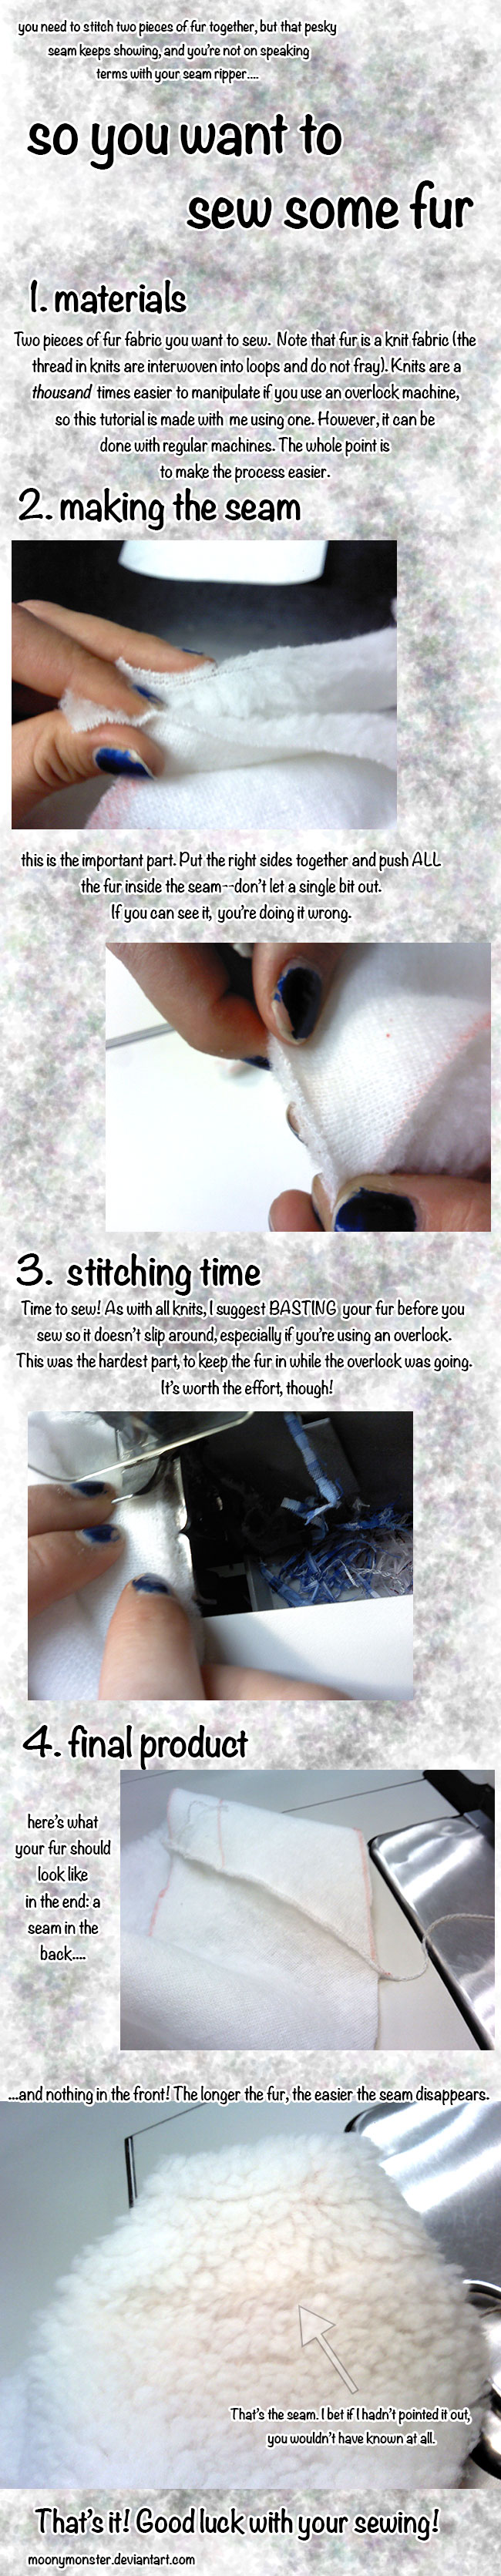 So You Want to Sew Some Fur